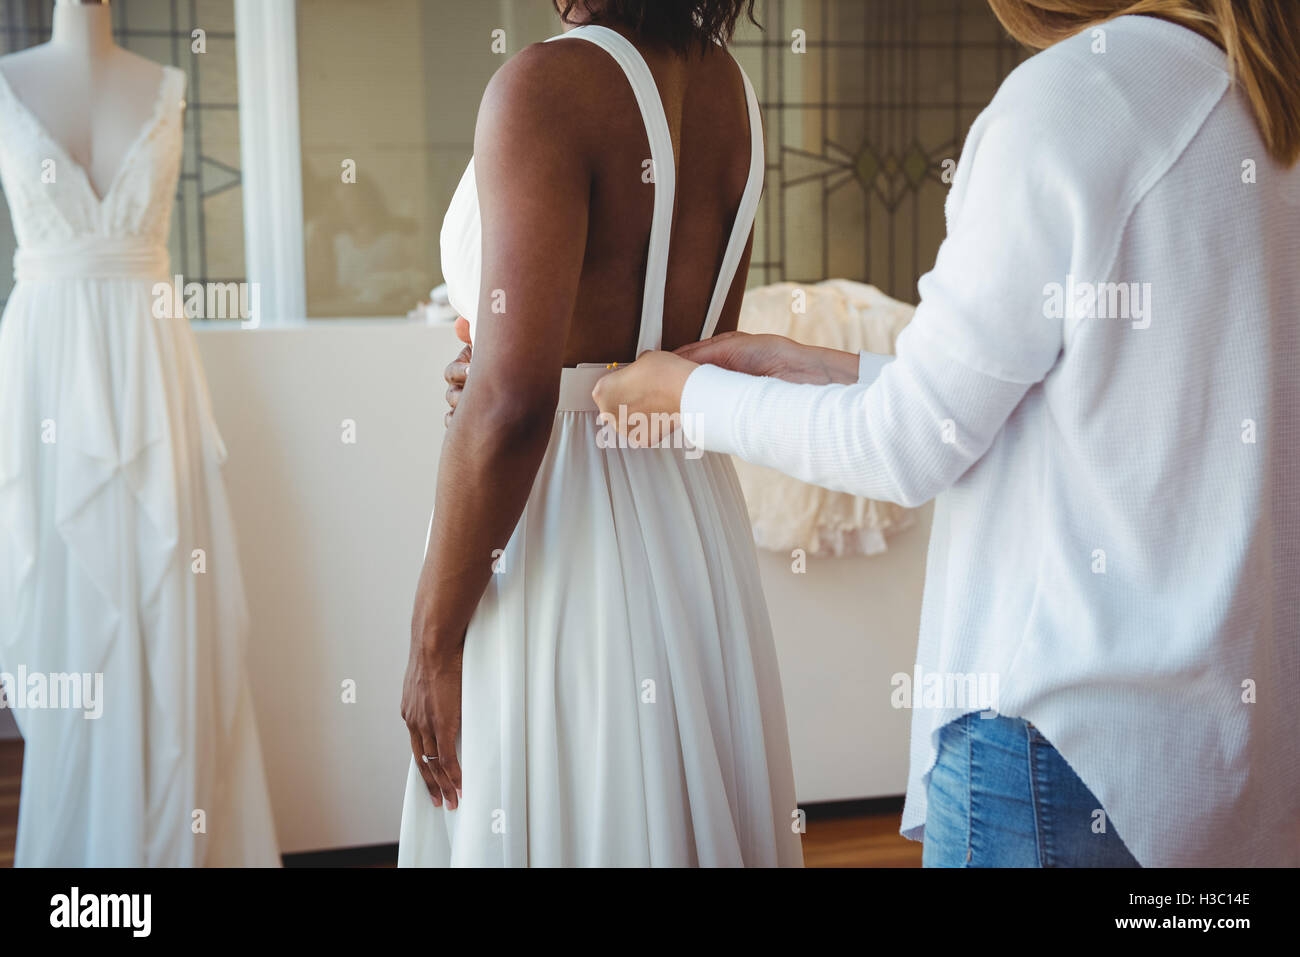 Woman trying on wedding dress with the assistance of fashion designer Stock Photo